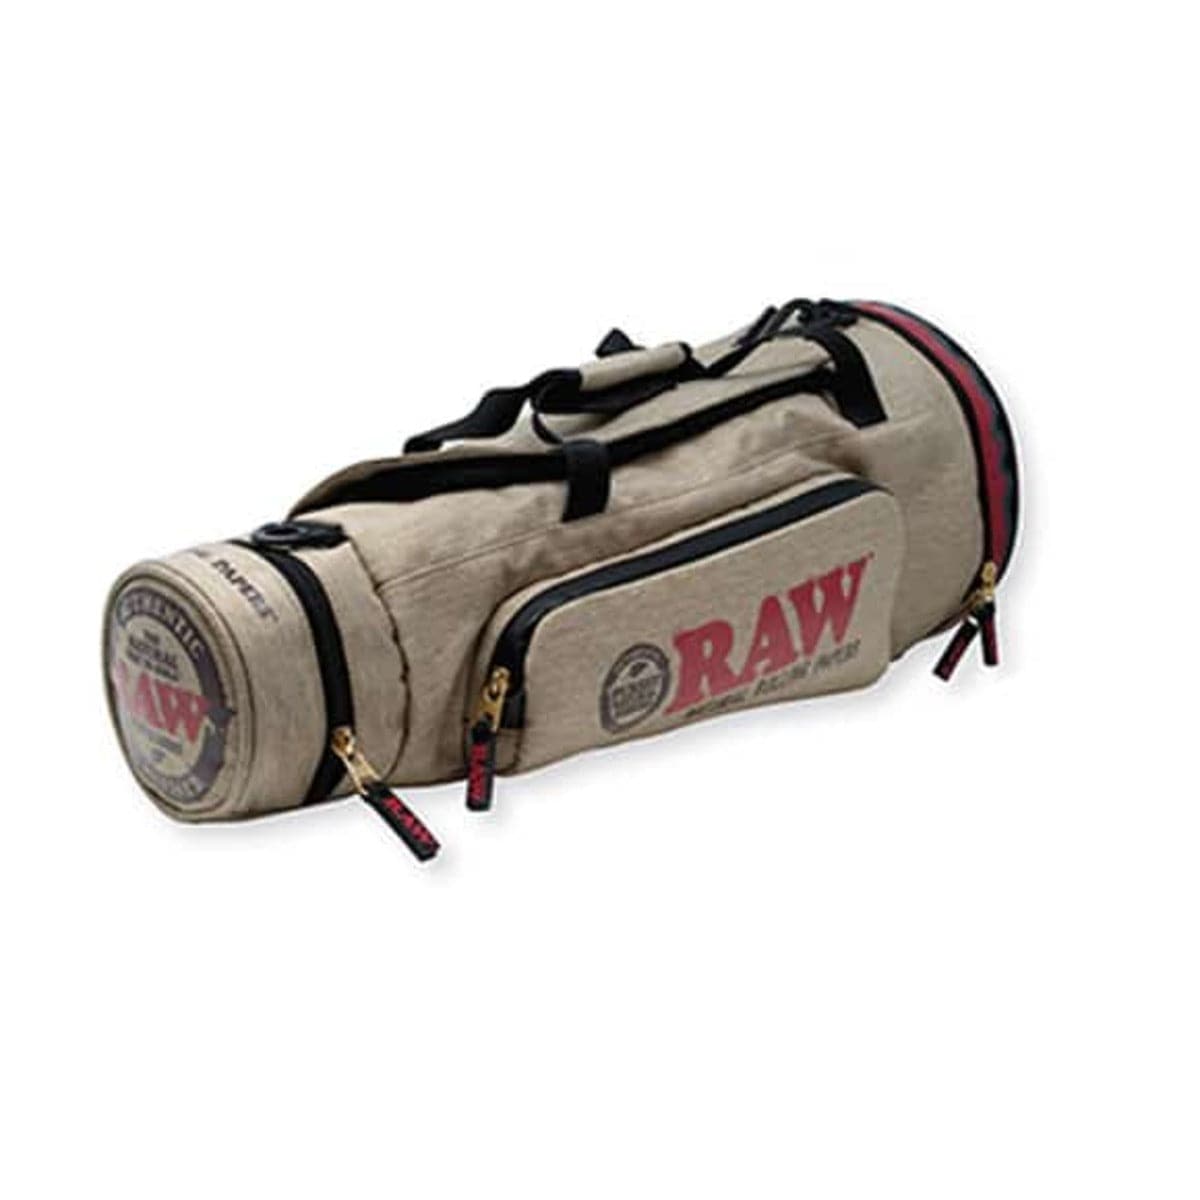 HBI Accessory RAW x Rolling Papers Cone Duffel Bag